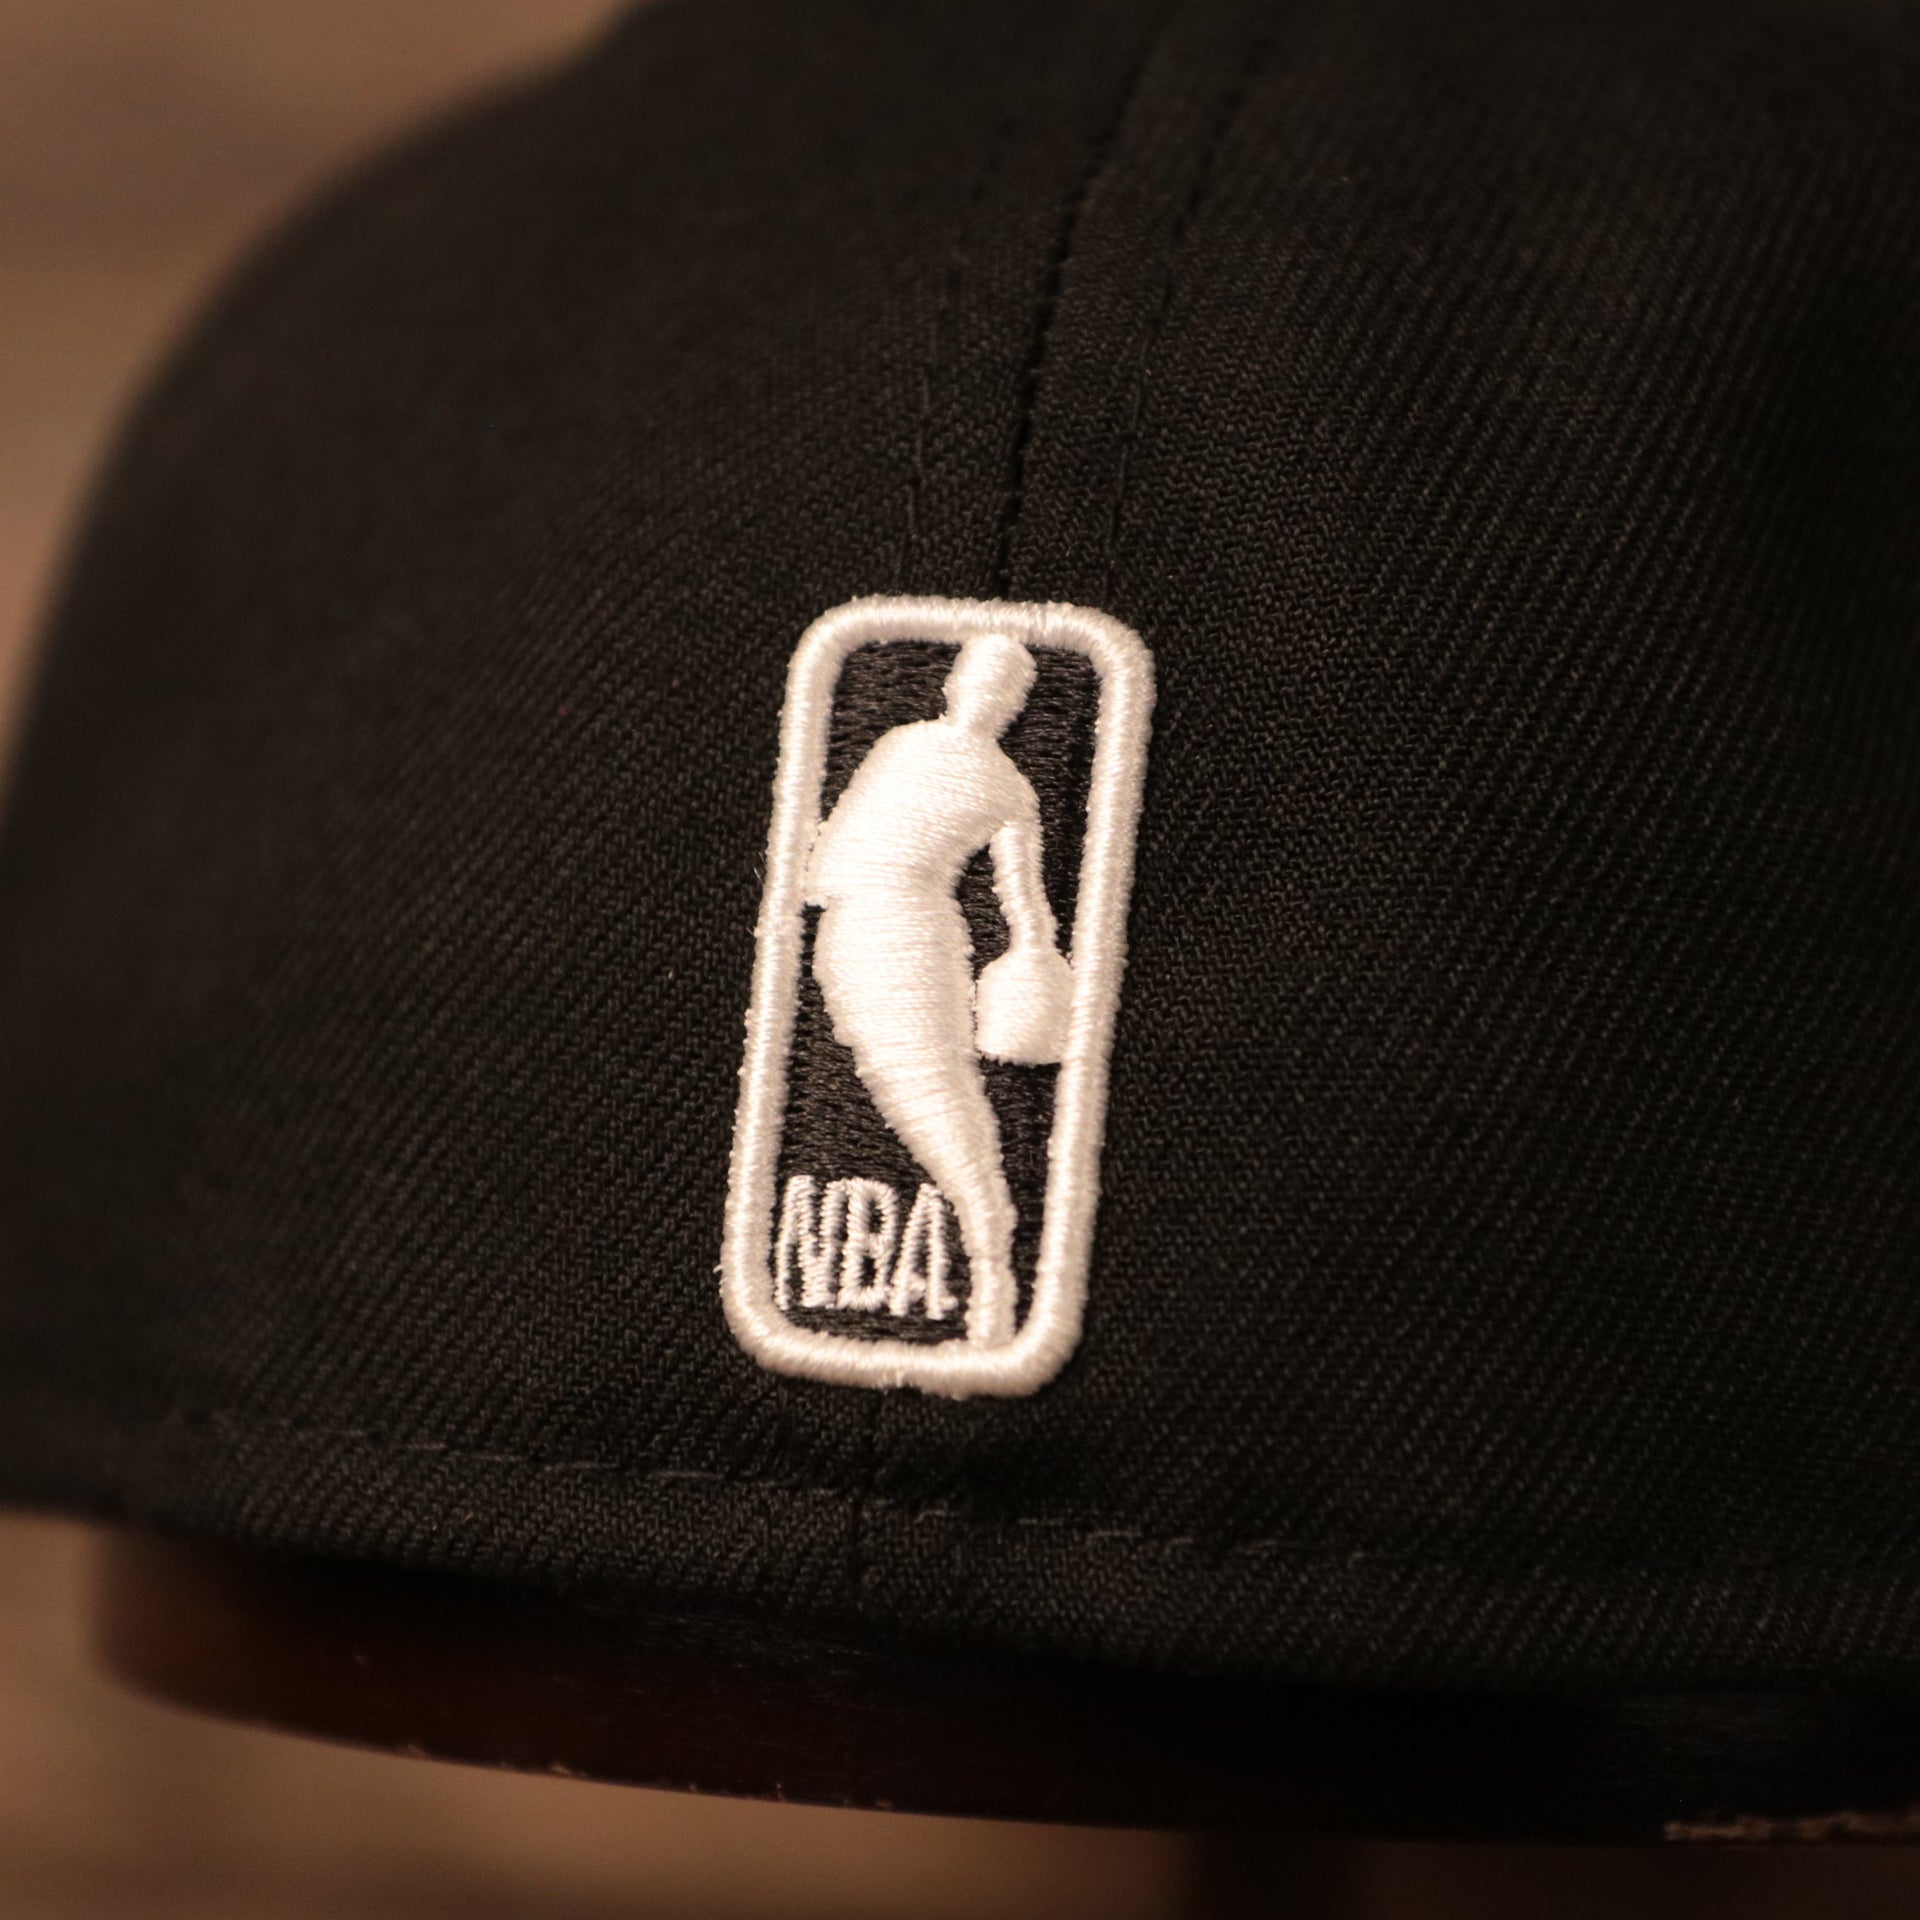 The back side of the black 17x Los Angeles Lakers champs hat has the white logo of NBA.